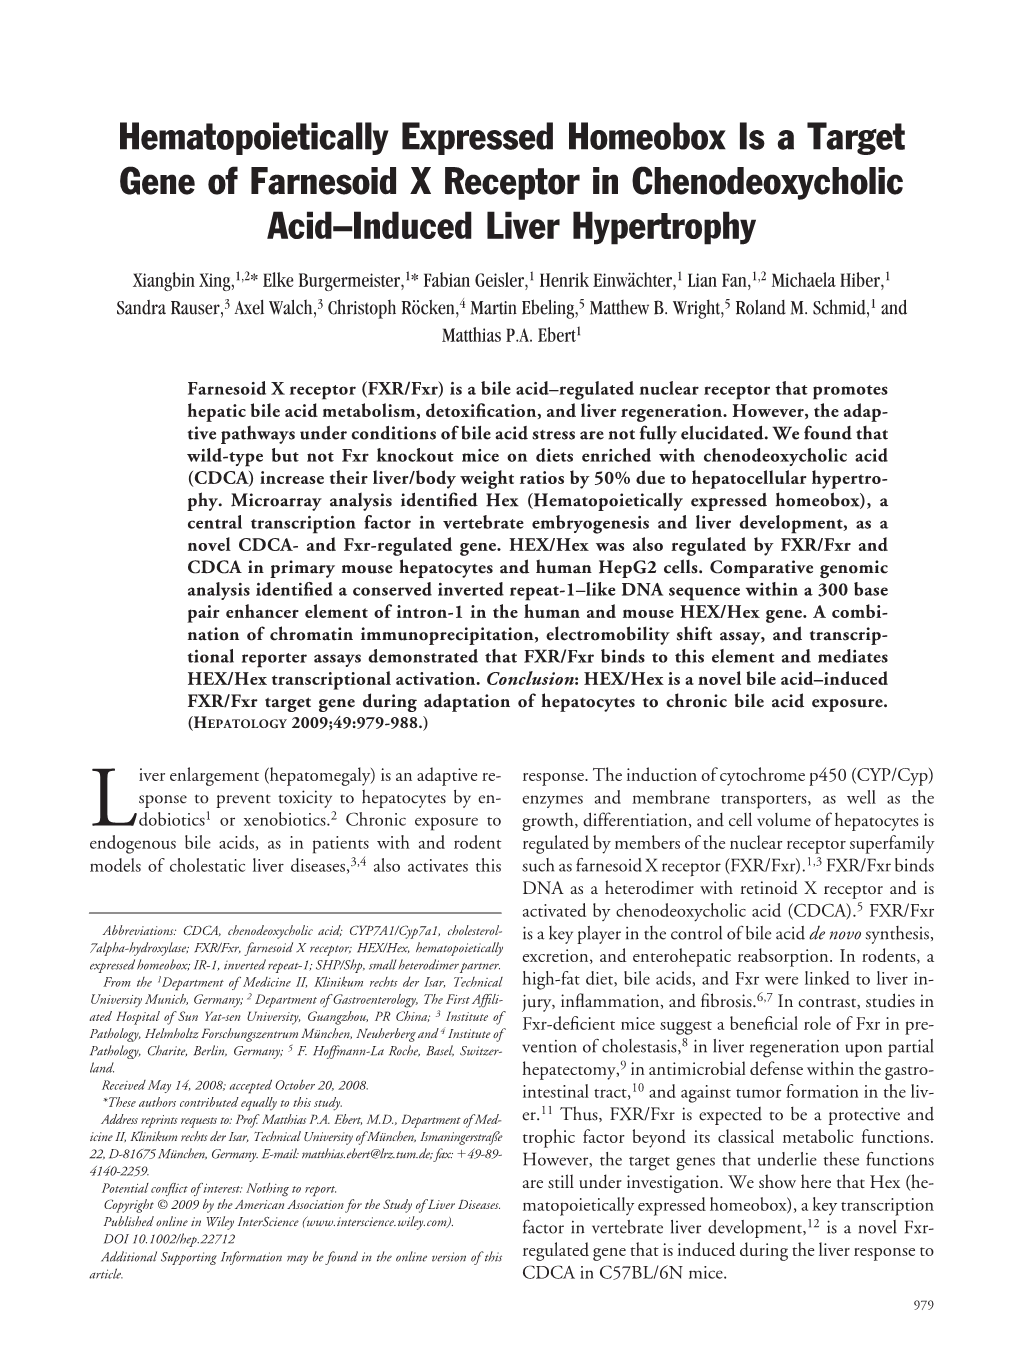 Hematopoietically Expressed Homeobox Is a Target Gene of Farnesoid X Receptor in Chenodeoxycholic Acid–Induced Liver Hypertrophy